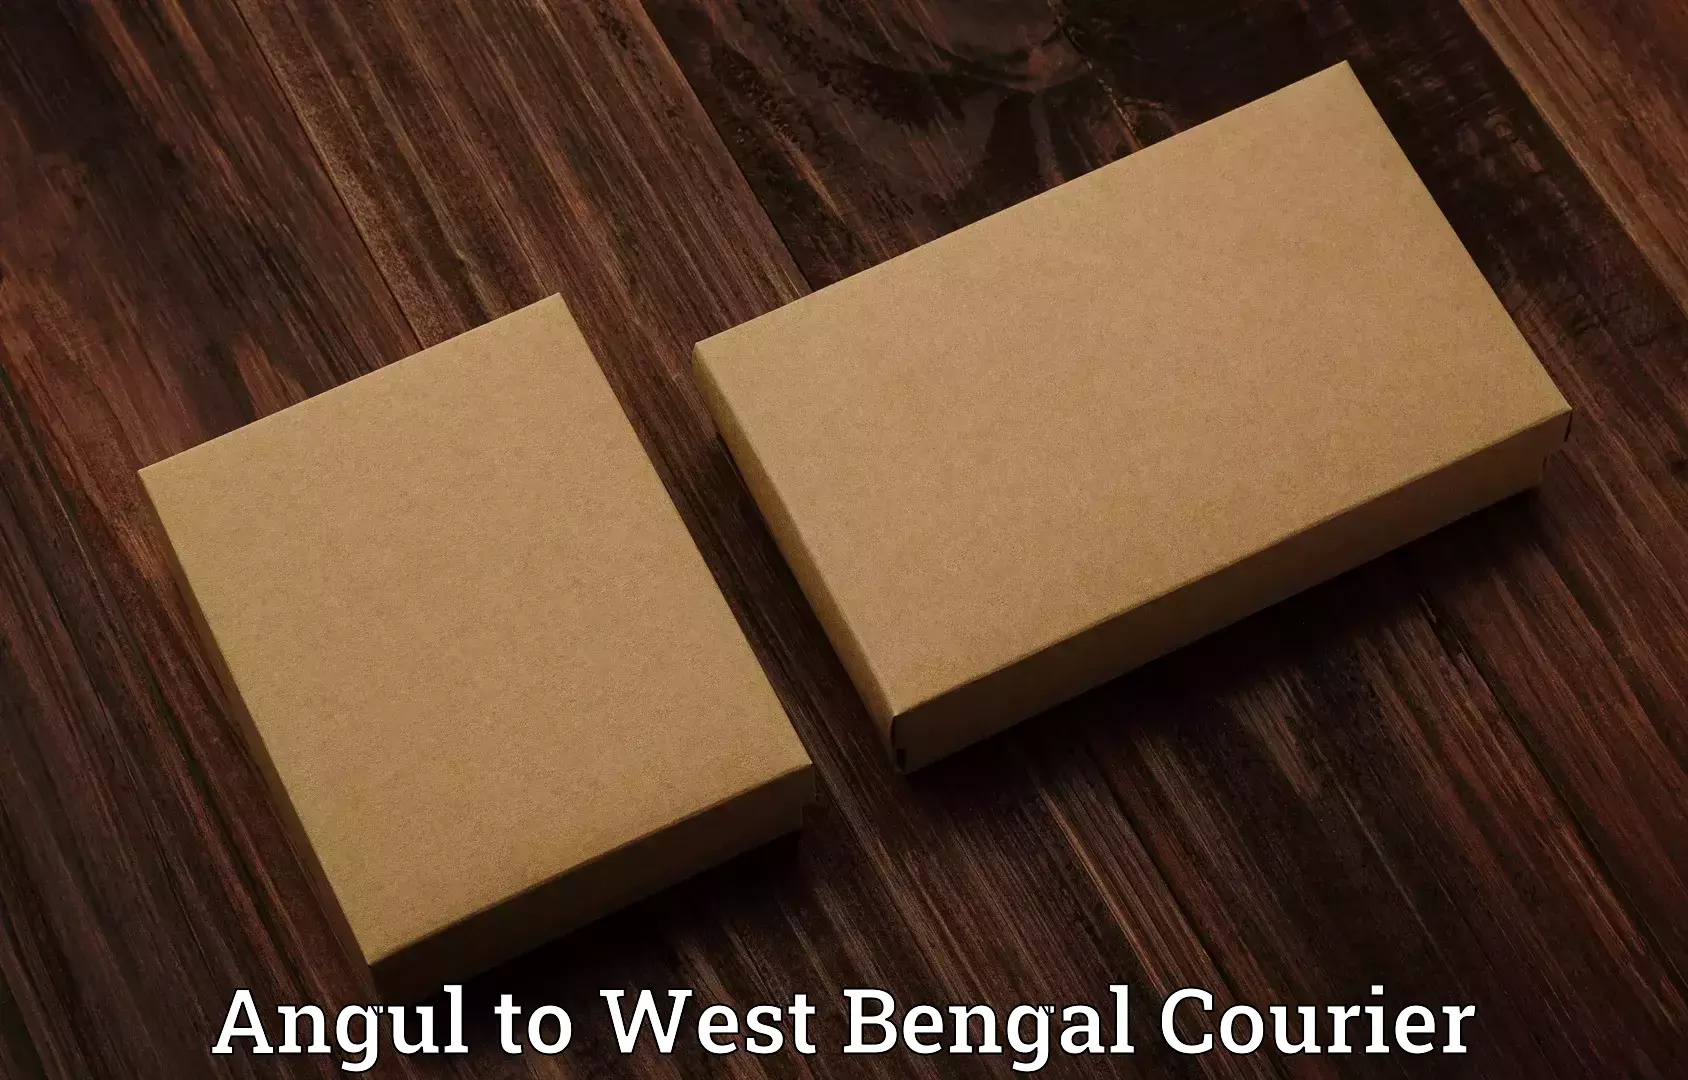 Luggage shipment specialists Angul to West Bengal